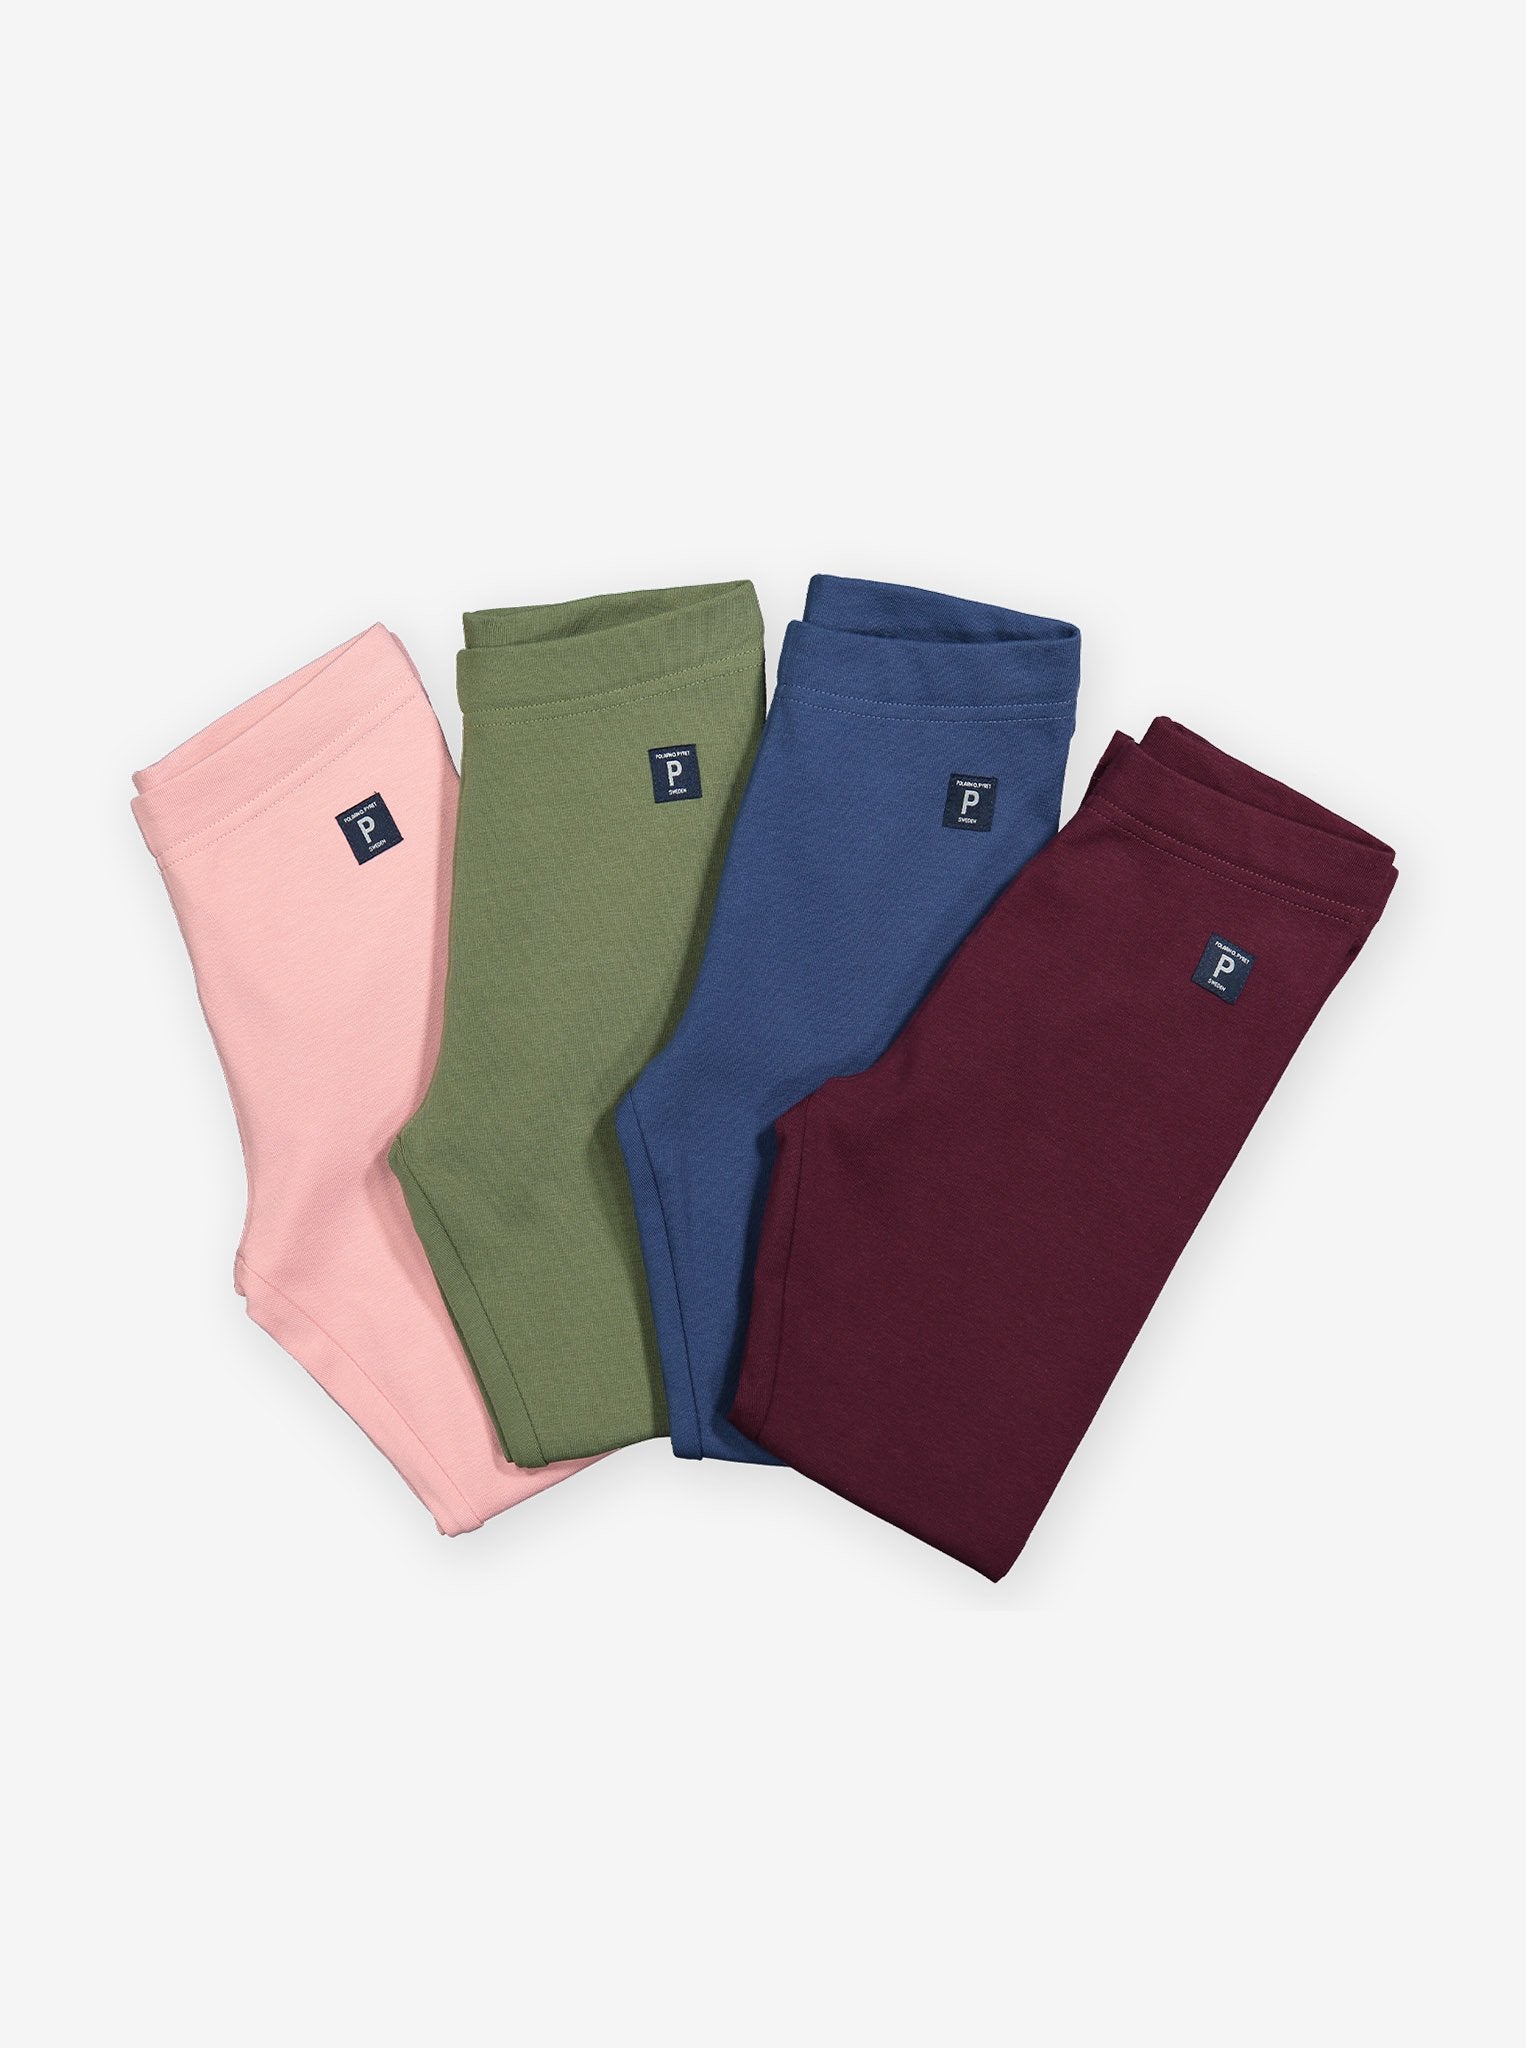 Kids leggings with a variety of colours such as pink, green, blue and maroon. Stays good as new even after multiple washes.